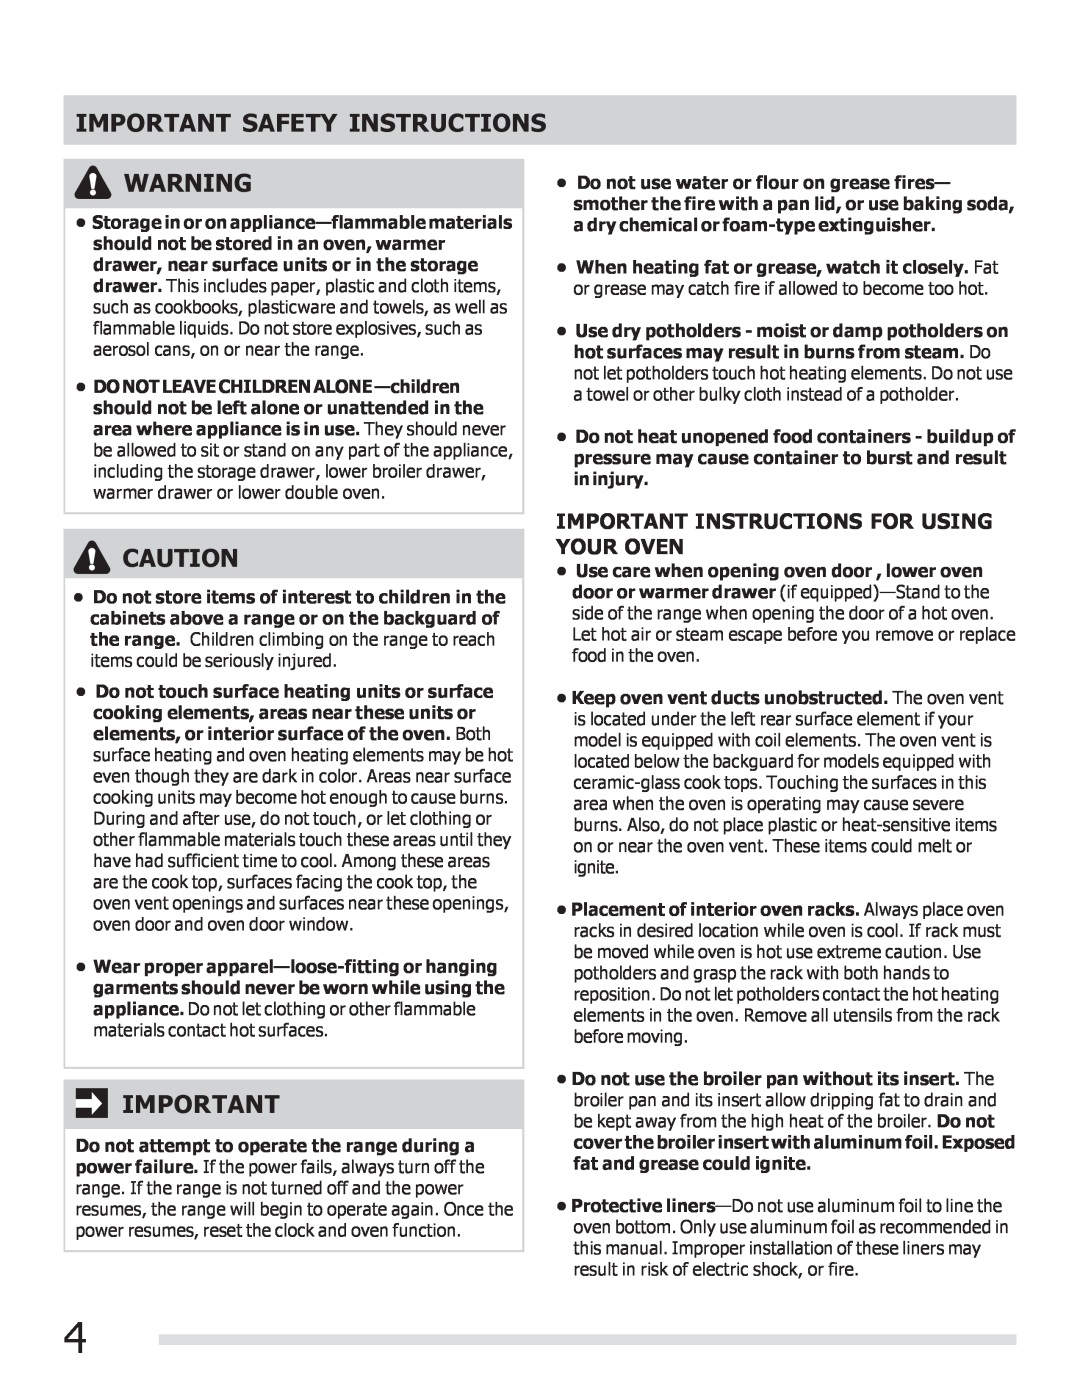 Frigidaire FFEF3010LW, FFEF3010LB Important Instructions For Using Your Oven, Important Safety Instructions 